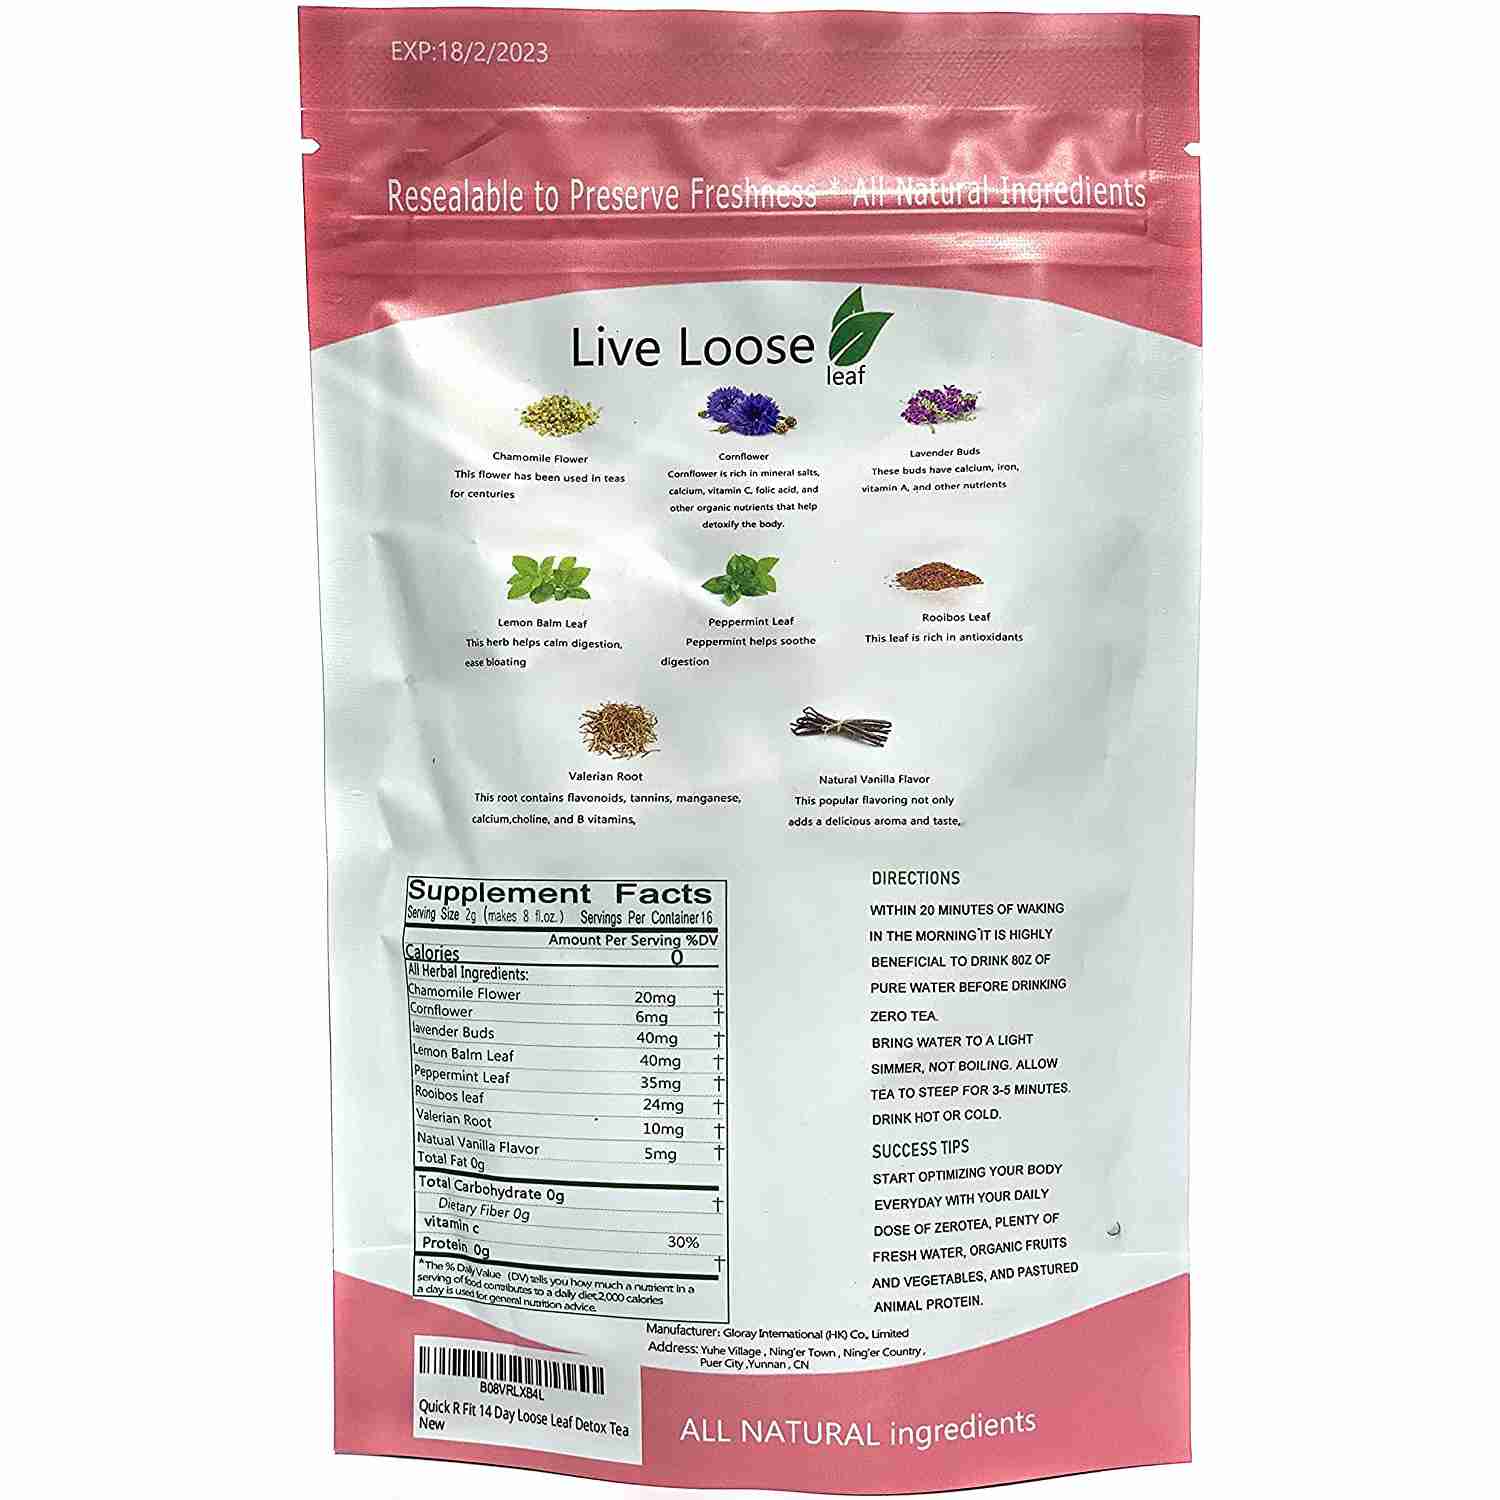 detox-tea-loose-leaf-14-day-teatox-weight-loss-slimming- with discount code